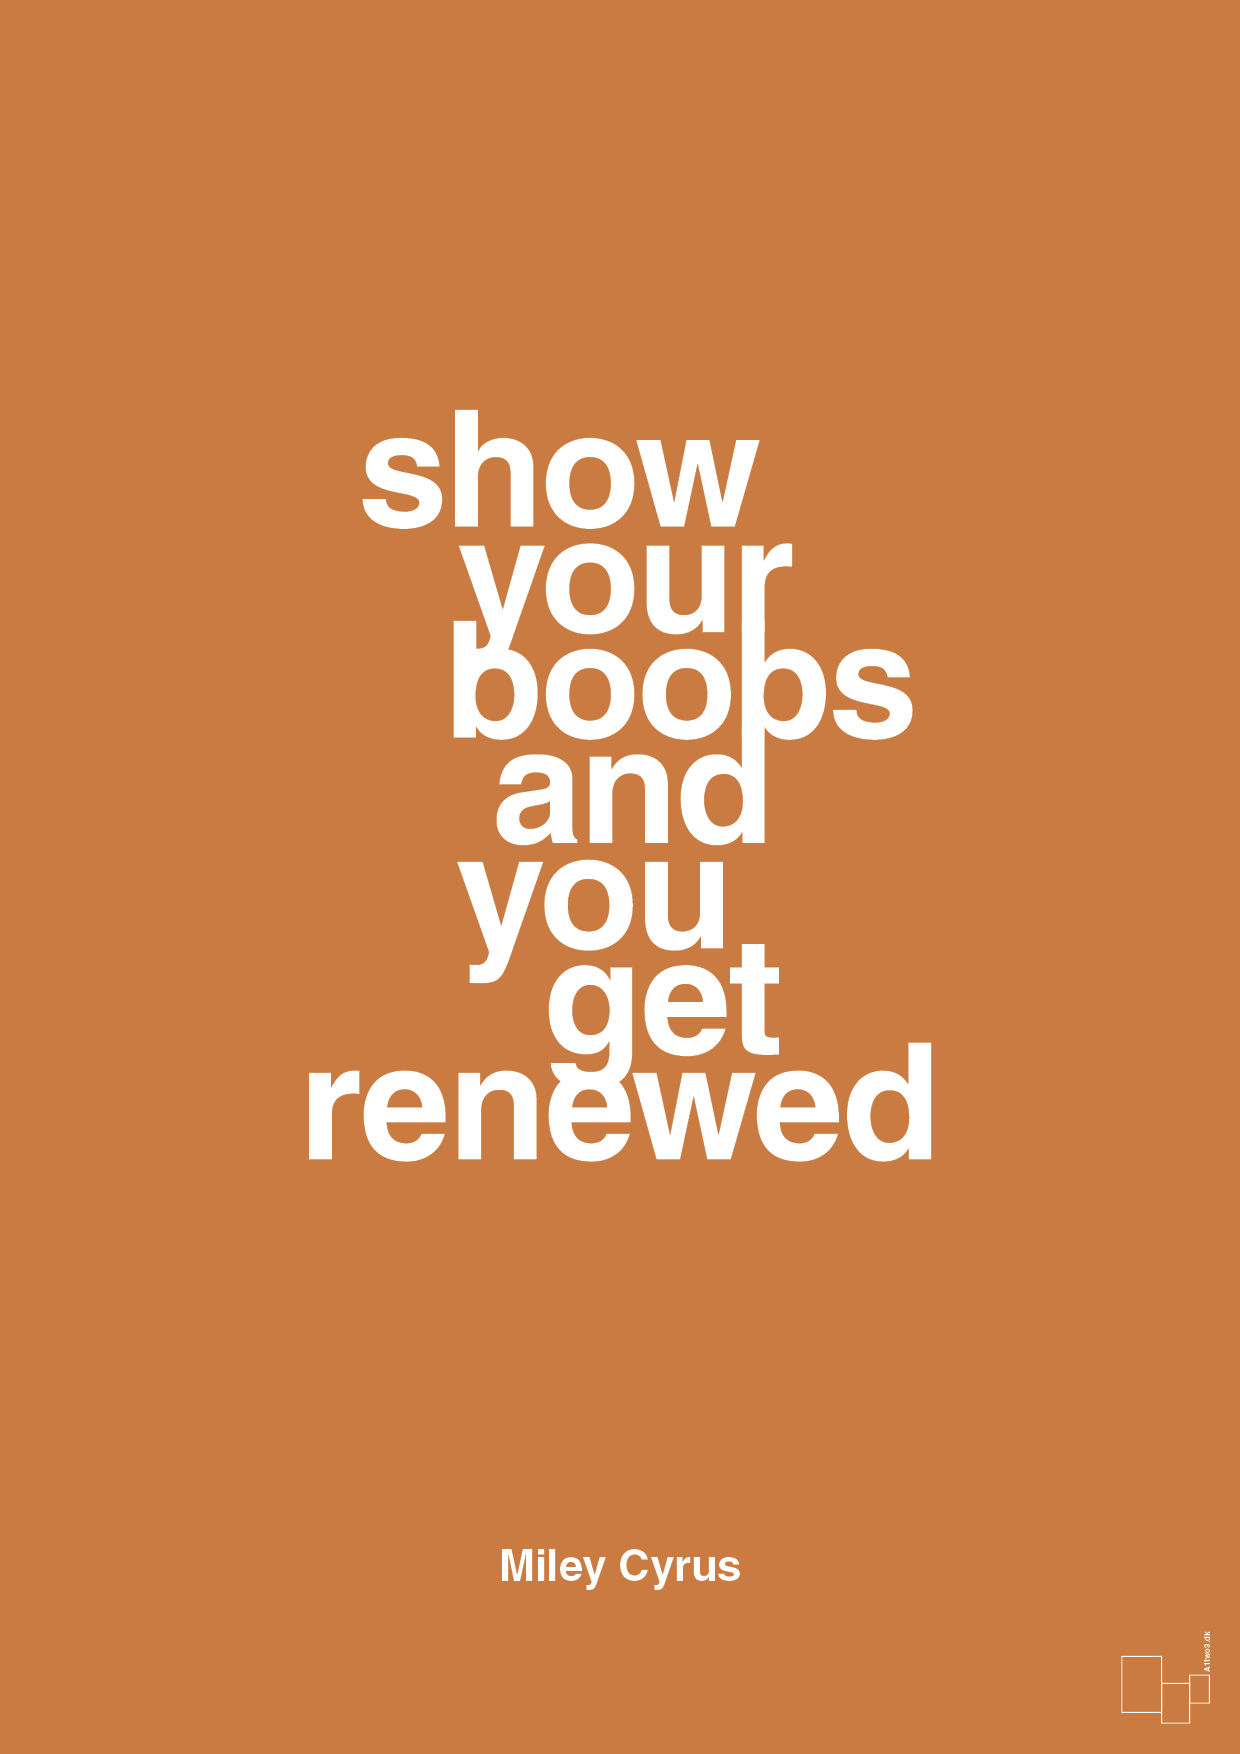 show your boobs and you get renewed - Plakat med Citater i Rumba Orange